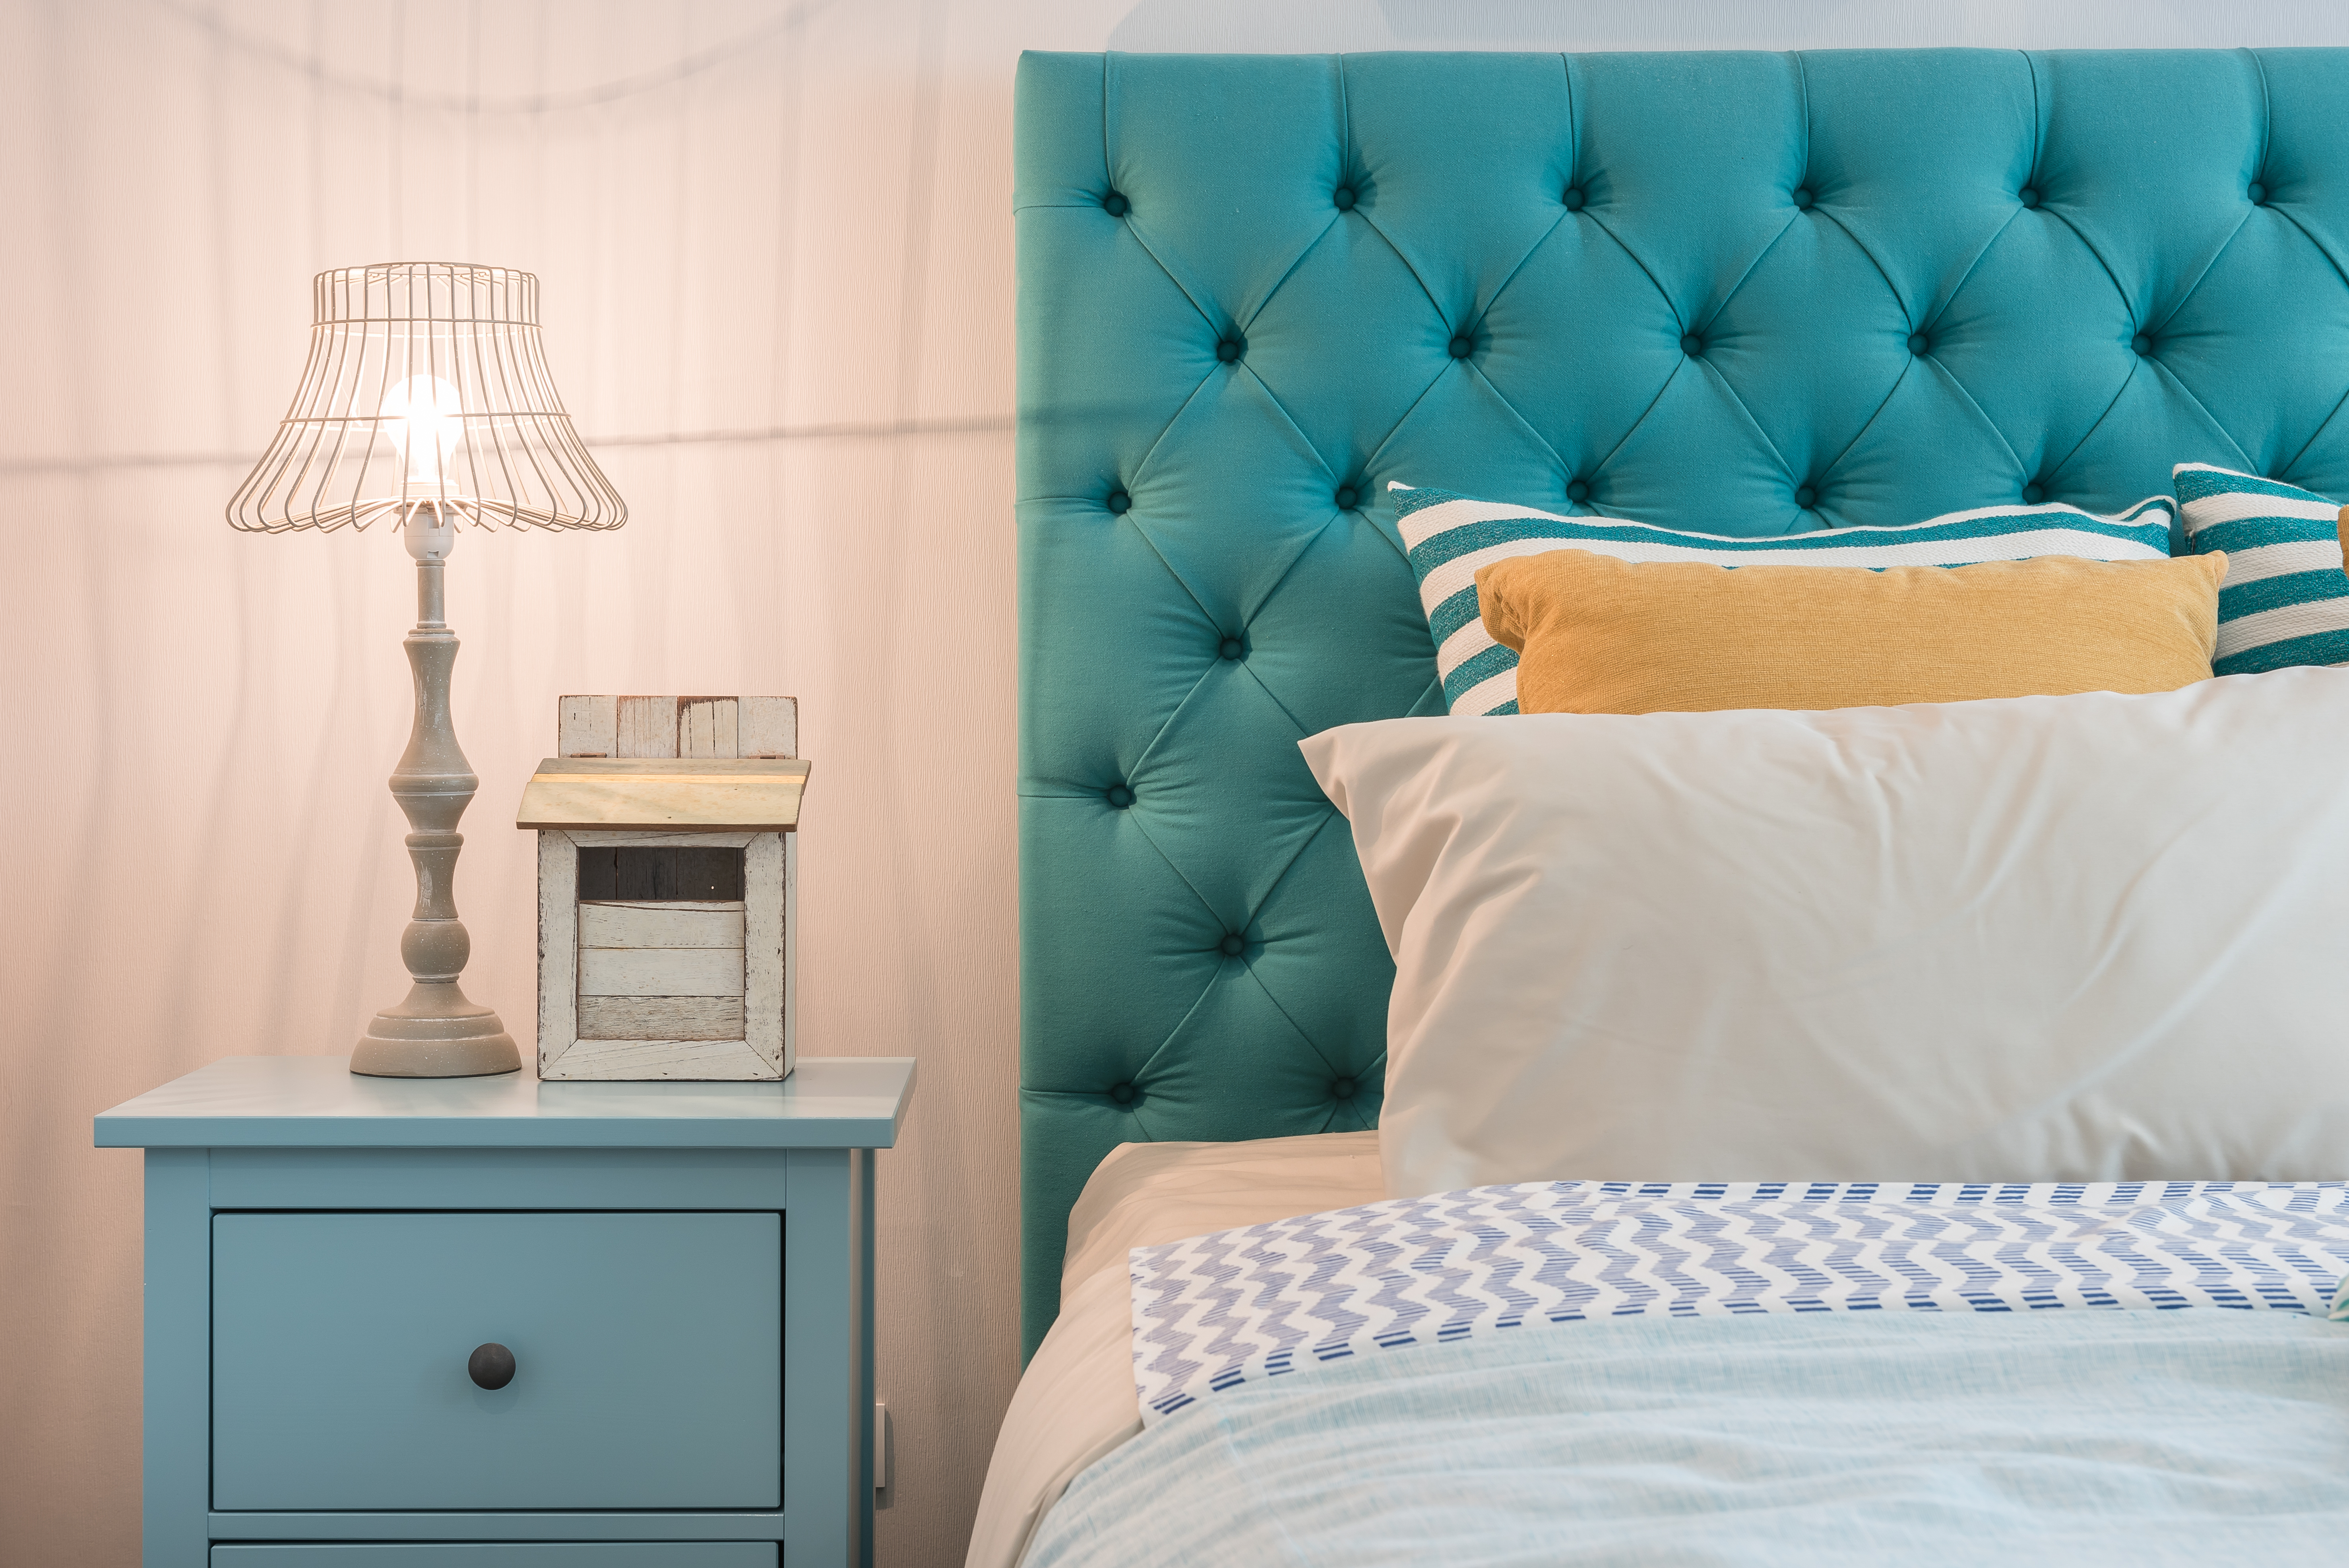 New Year: Ideas for Bedroom Decor to Start the New Year